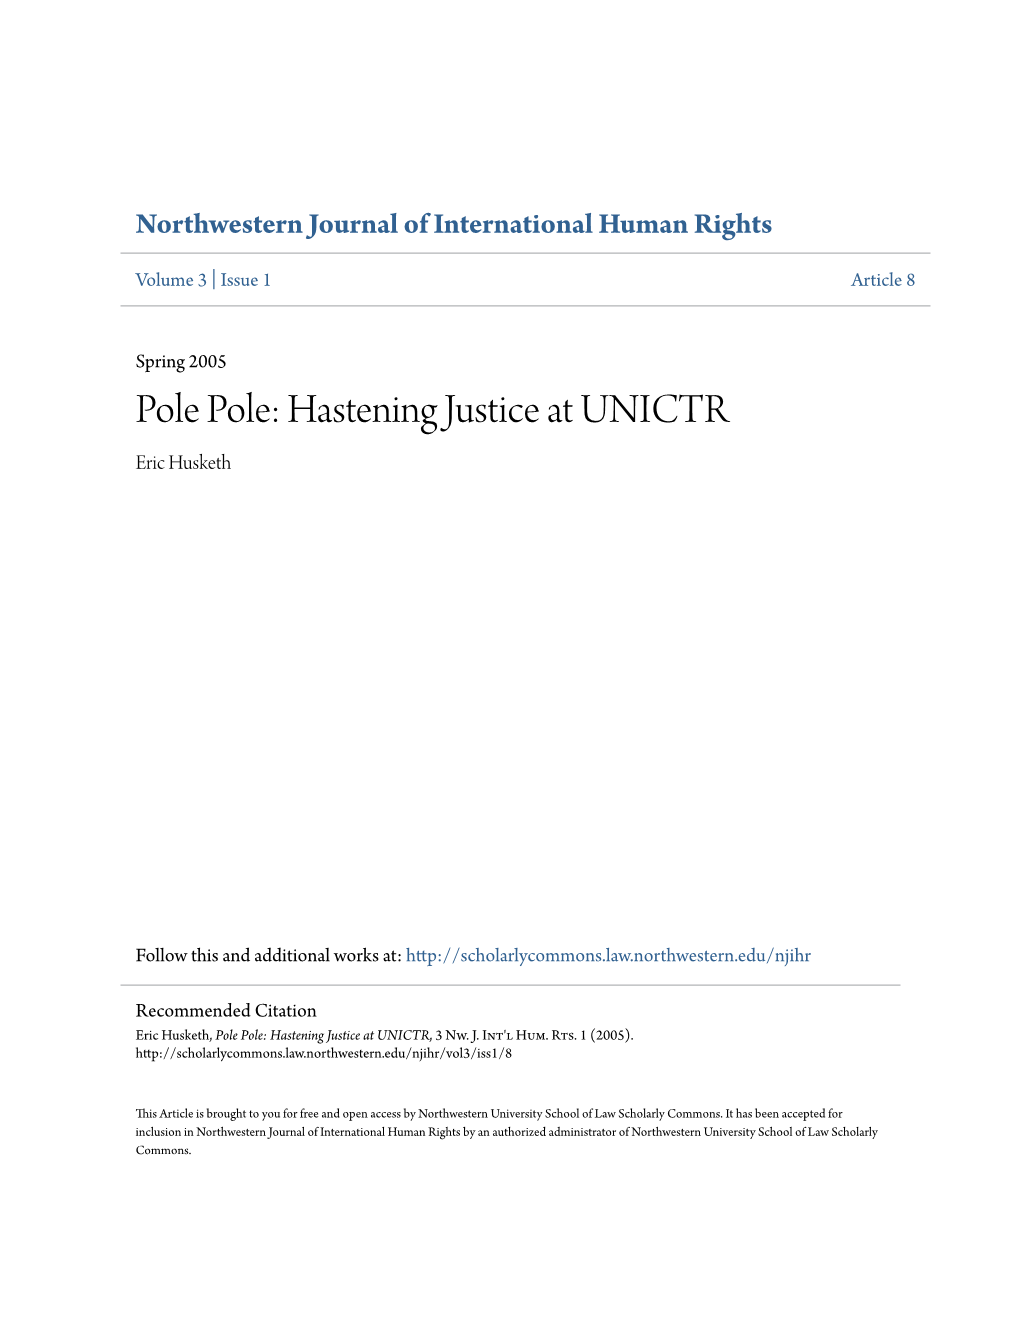 Hastening Justice at UNICTR Eric Husketh